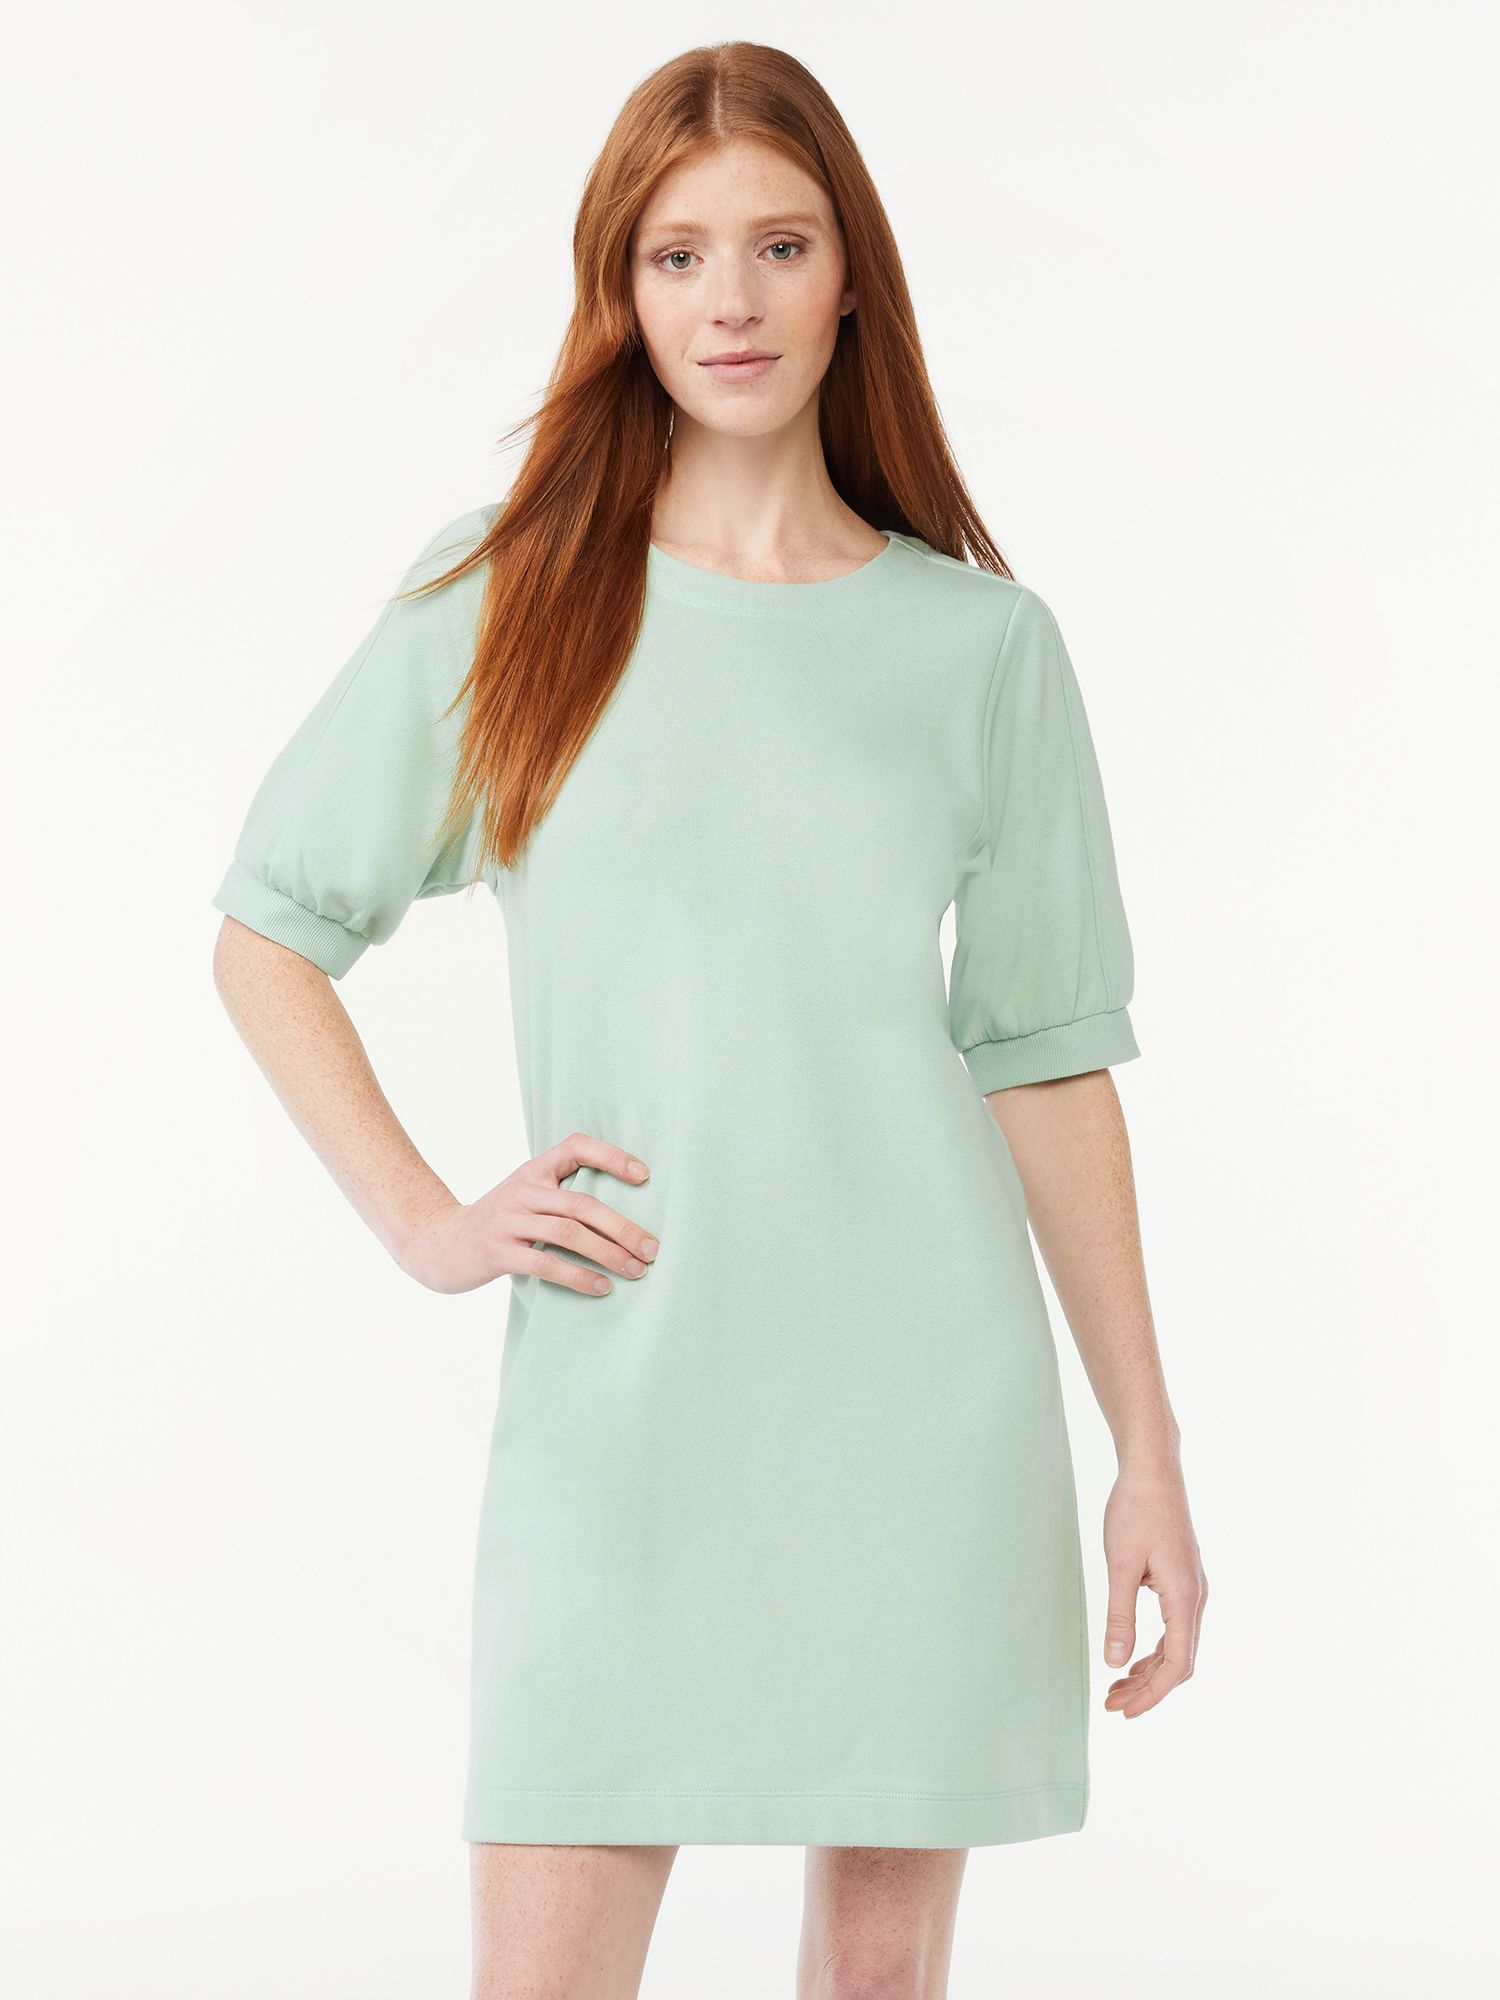 Free AssemblyFree Assembly Women's Bow Back Mini Dress with Puff SleevesUSDNow $19.98was $30.00$3... | Walmart (US)